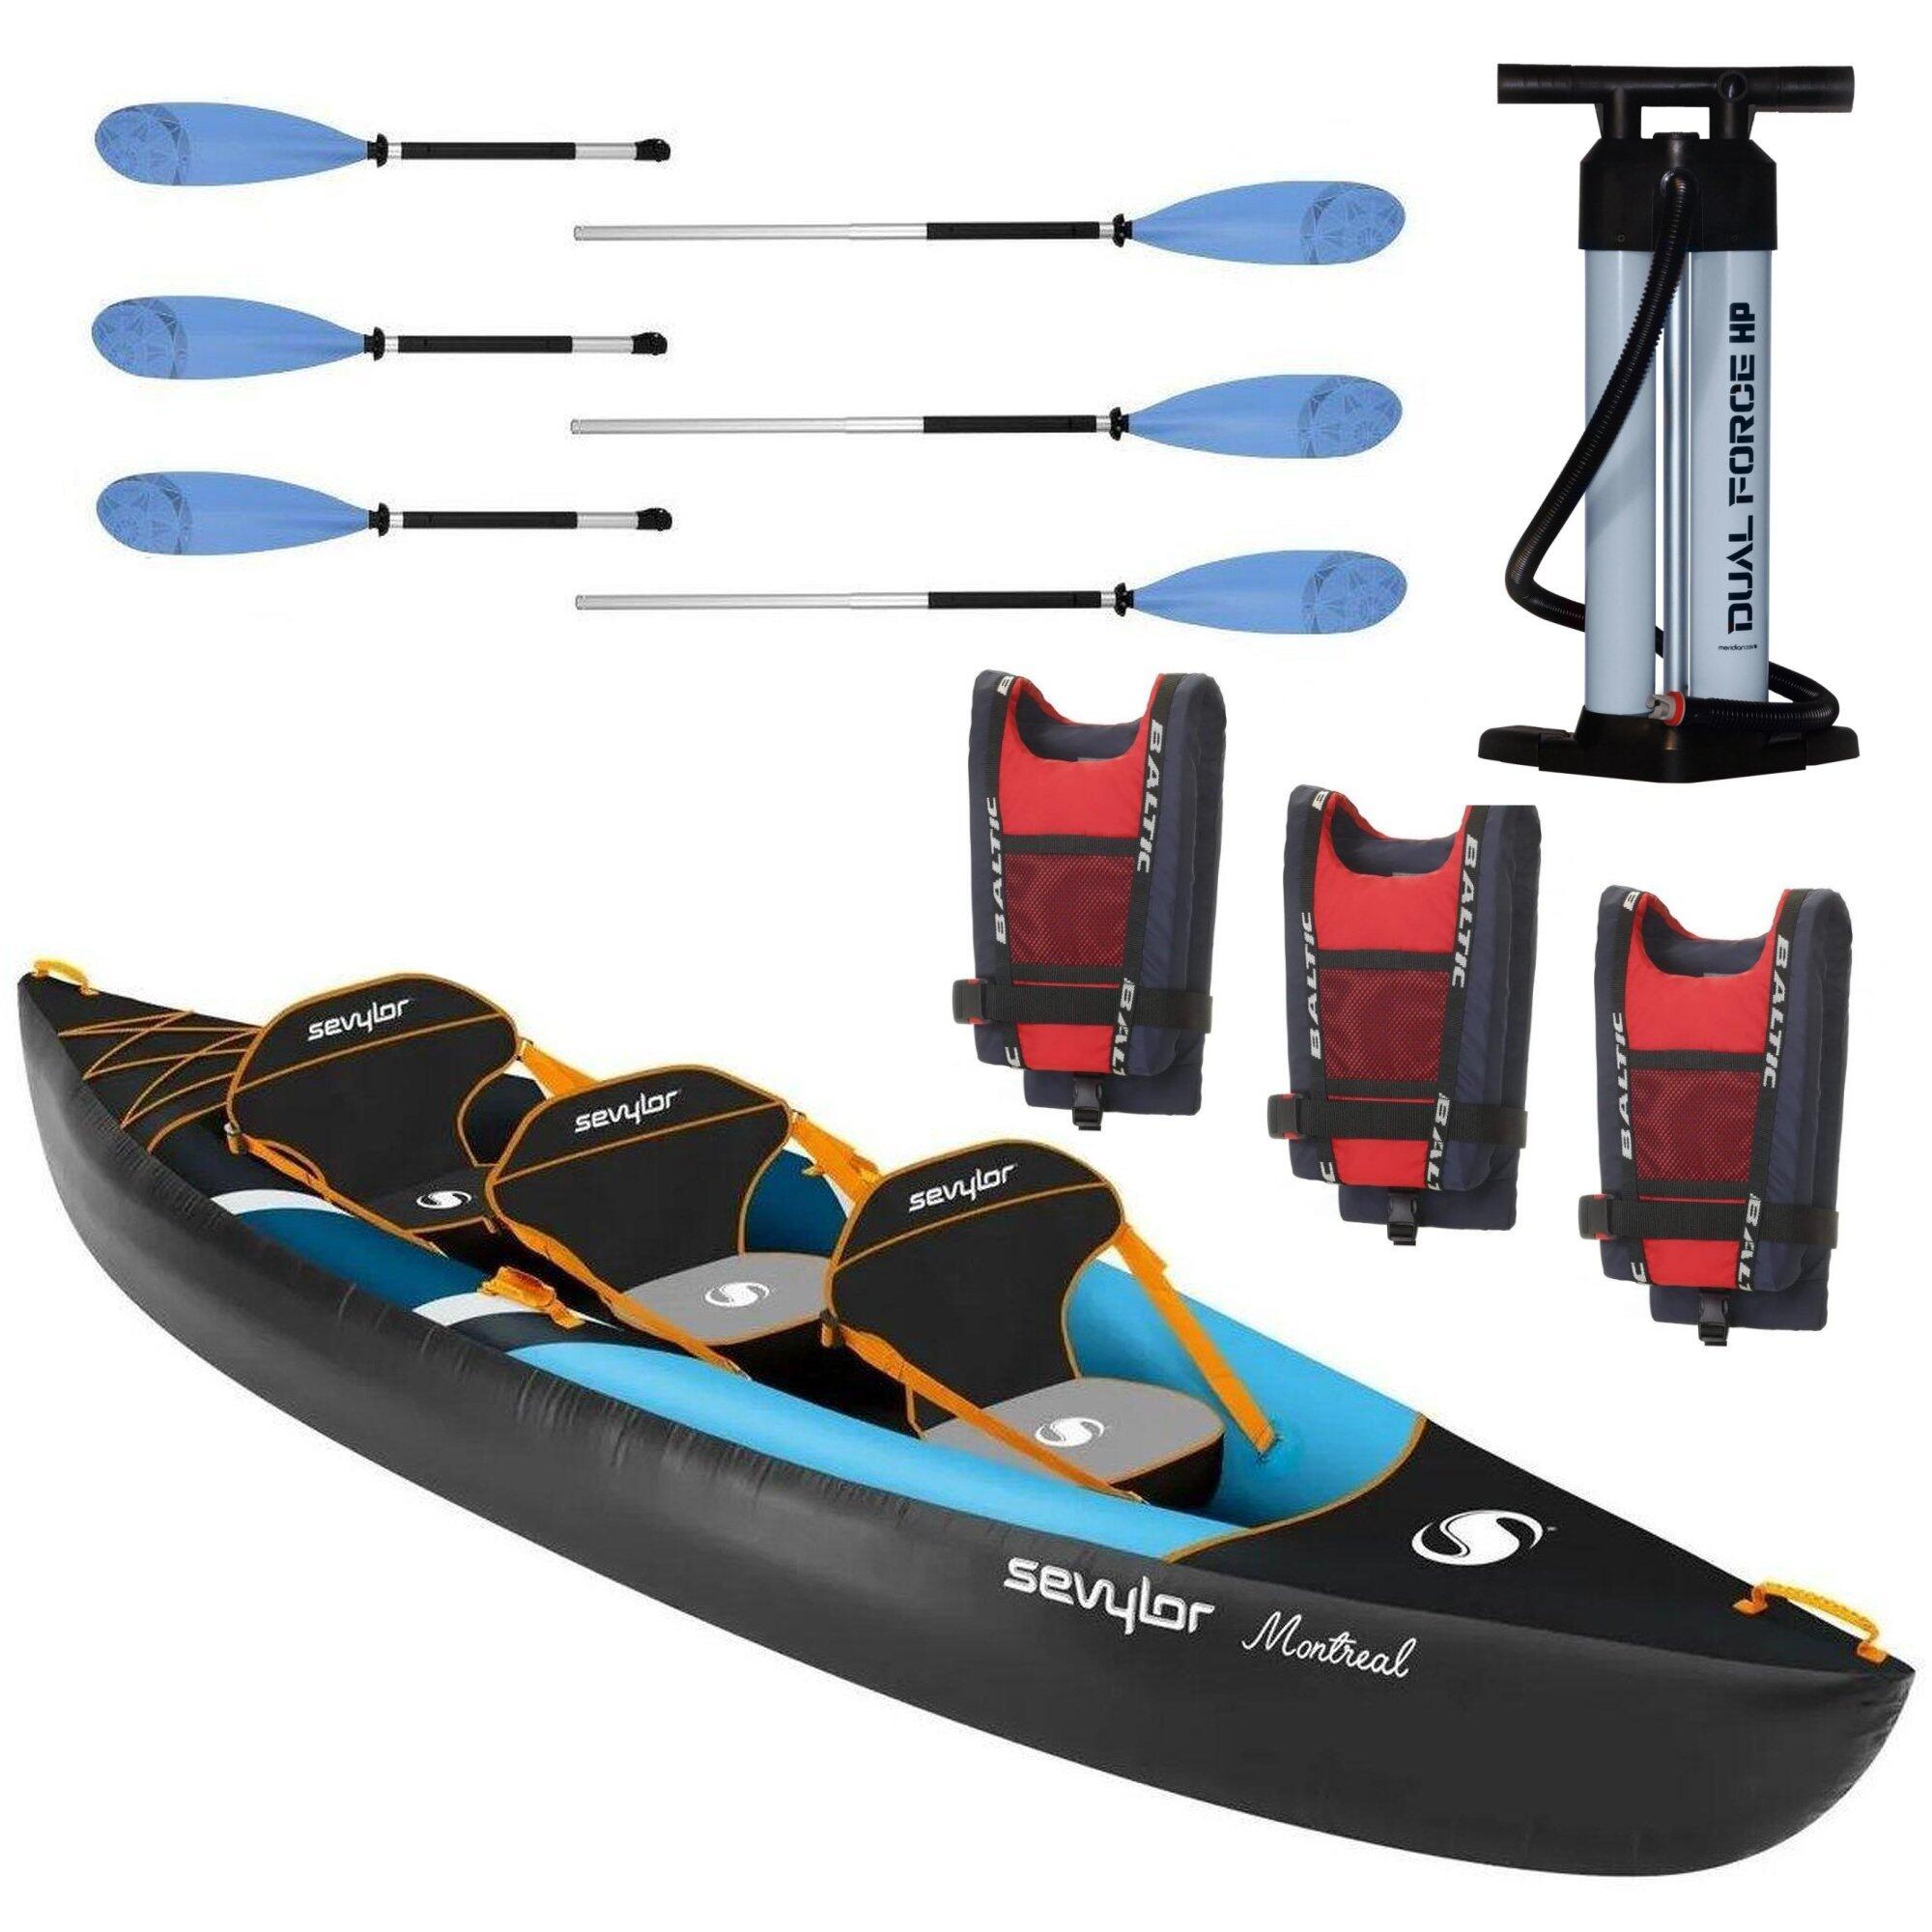 SEVYLOR Montreal 3 Person inflatable Kayak kit with Buoyancy Aids, Paddles & HP Pump